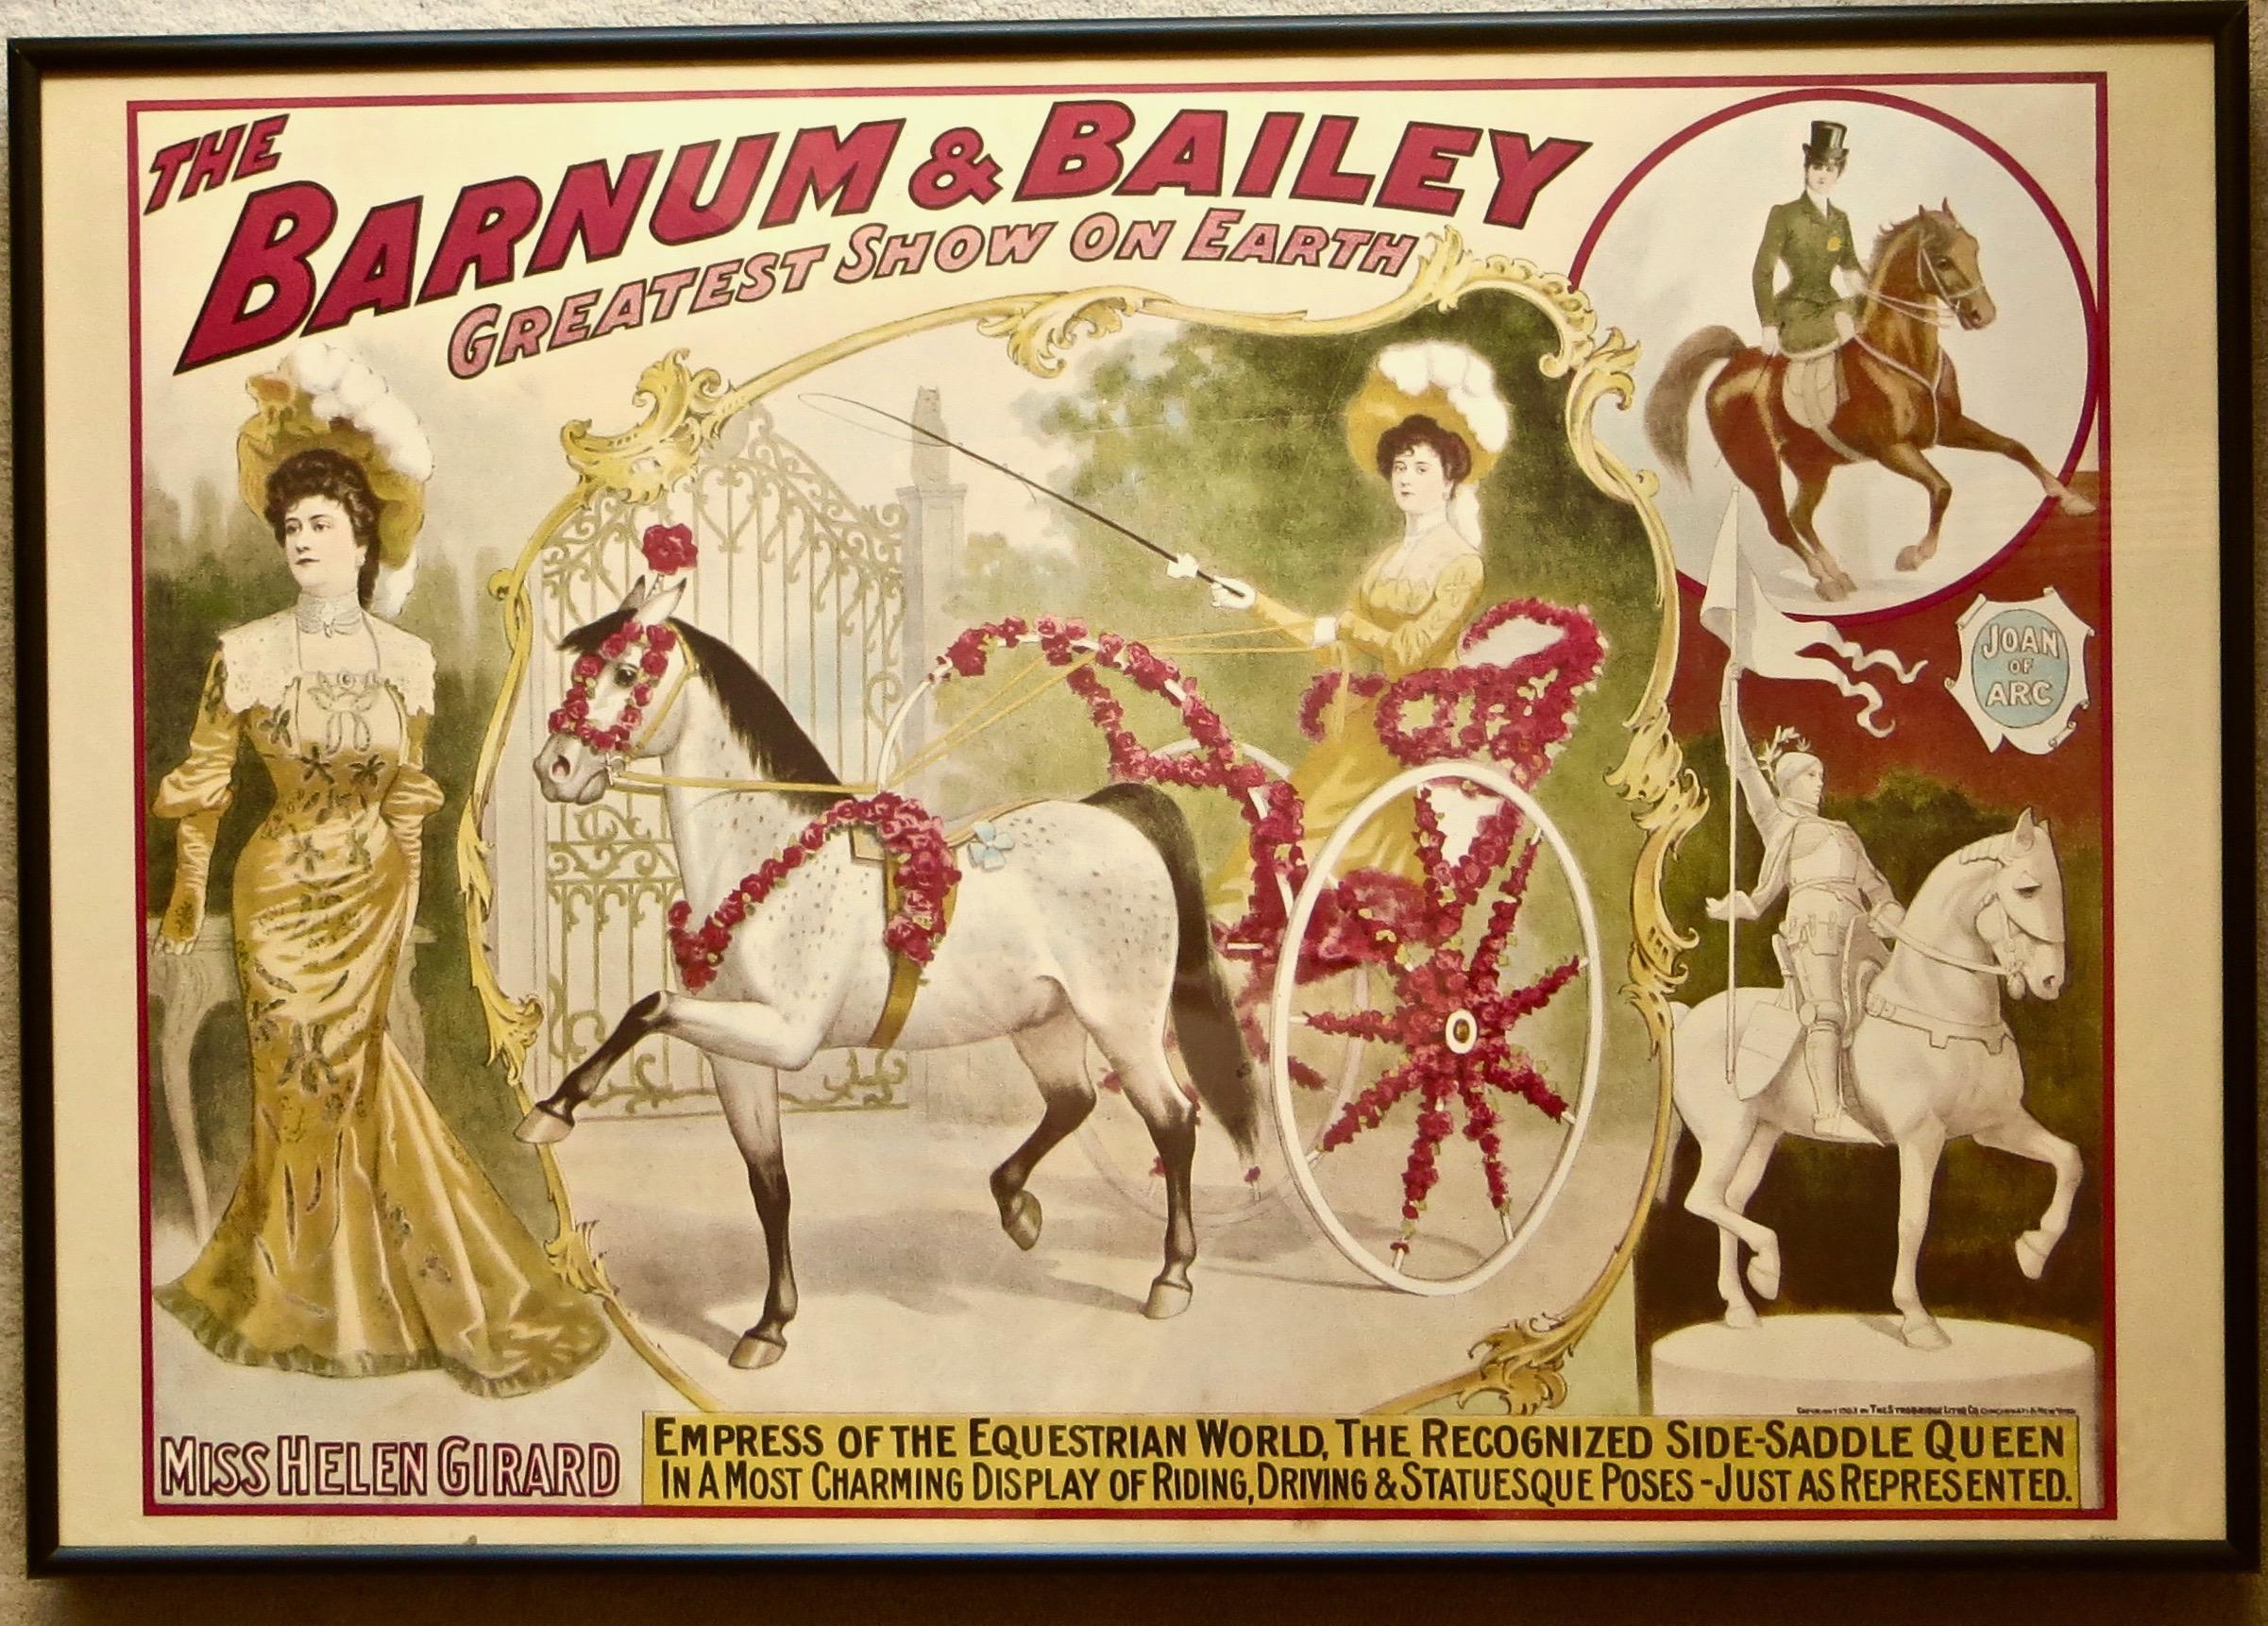 Polychromed Equestrian Circus Poster by Ringling Bros Ca. 1971 Featuring 